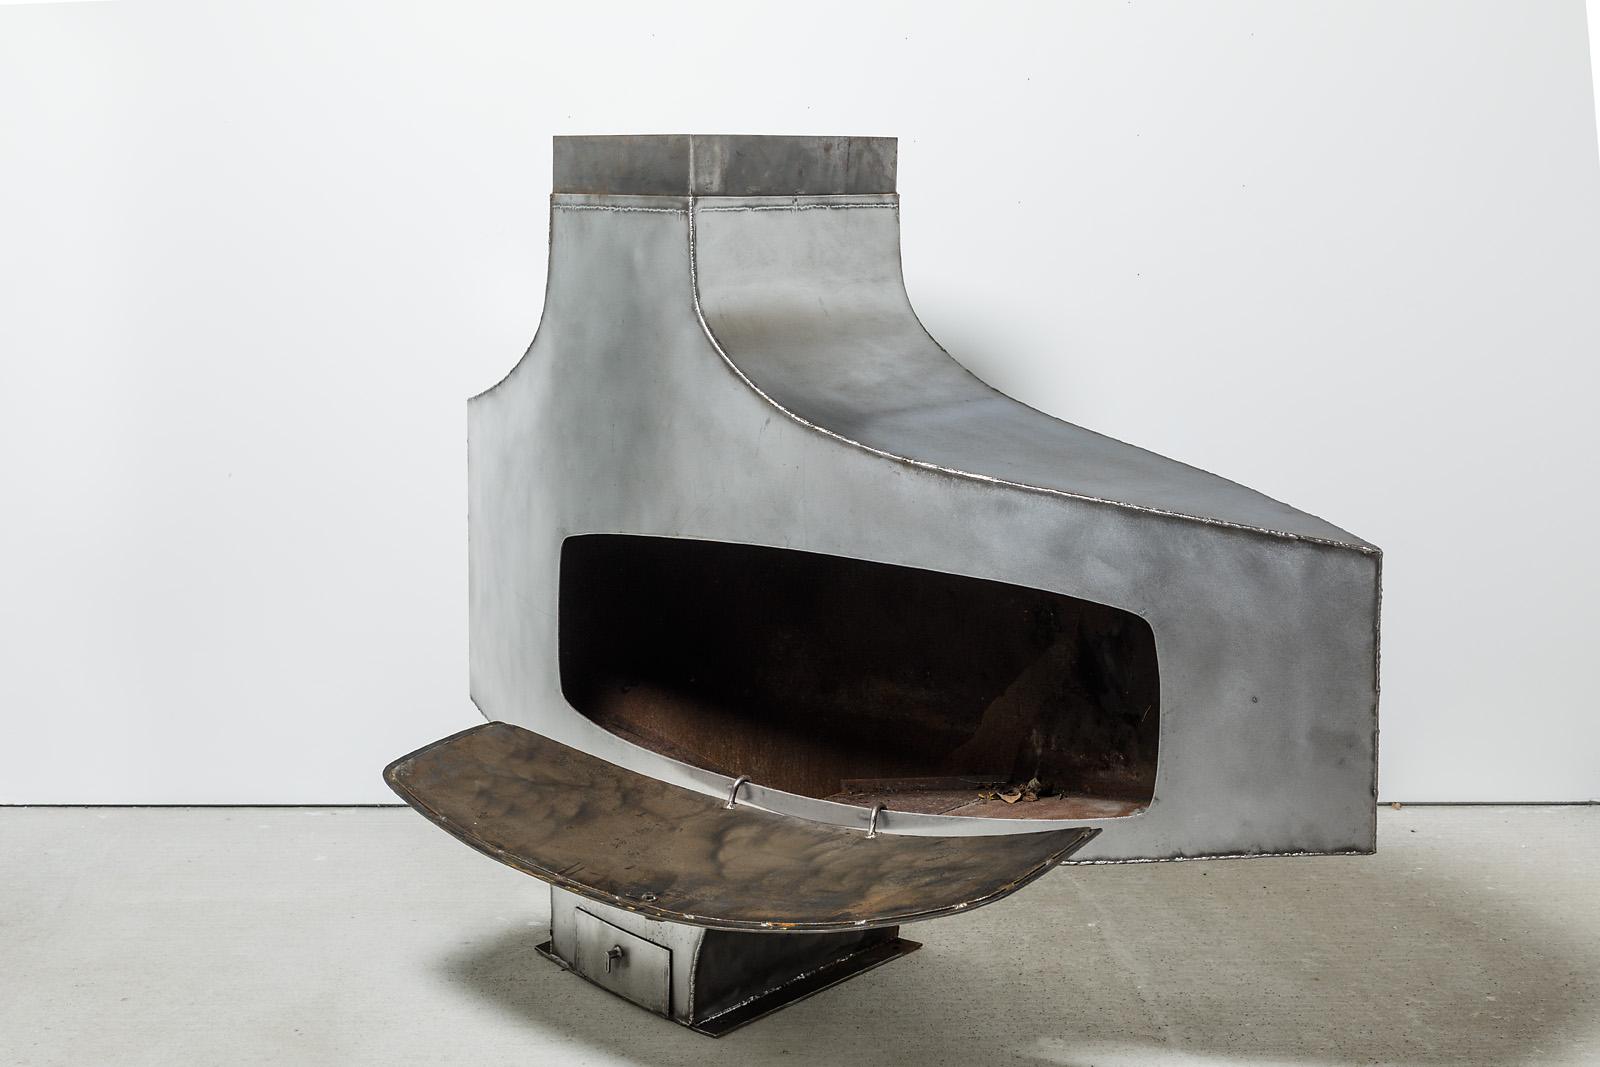 Late 20th Century Midcentury Iron Sculptural Fireplace Abstract Form by Imbert, circa 1980